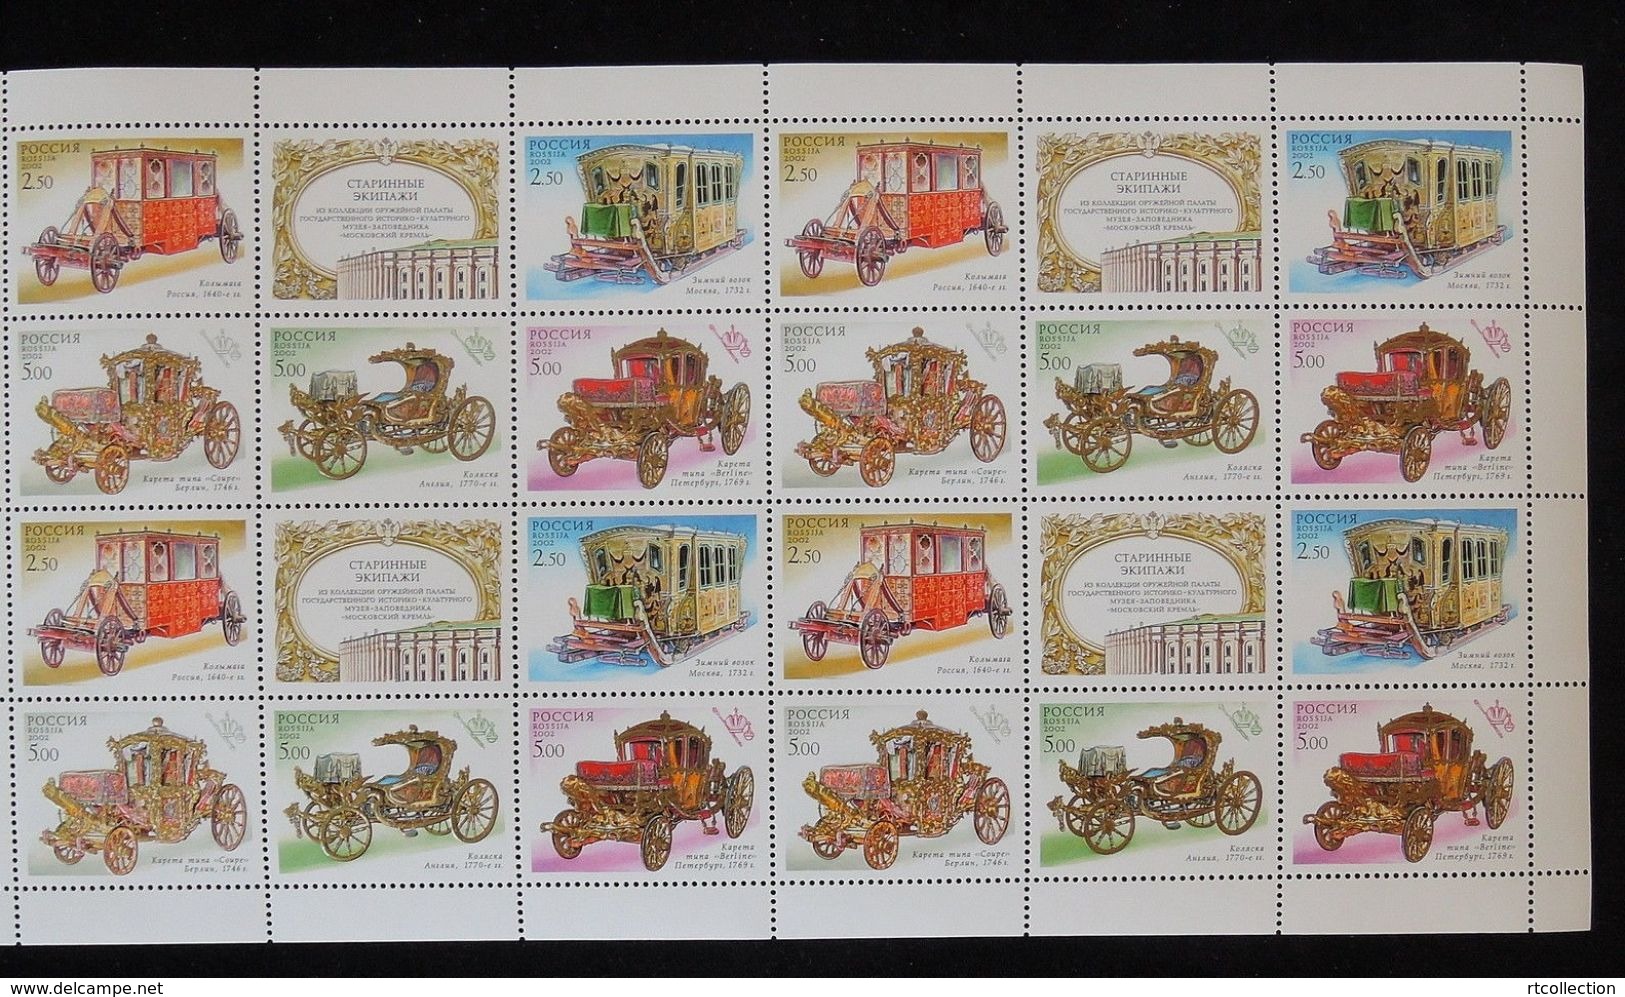 Russia 2002 Sheet Antique Coach Carriage Stage-Coaches Moscow Berlin St. Petersburg Car Transport Stamps MNH Mi 994-998 - Feuilles Complètes